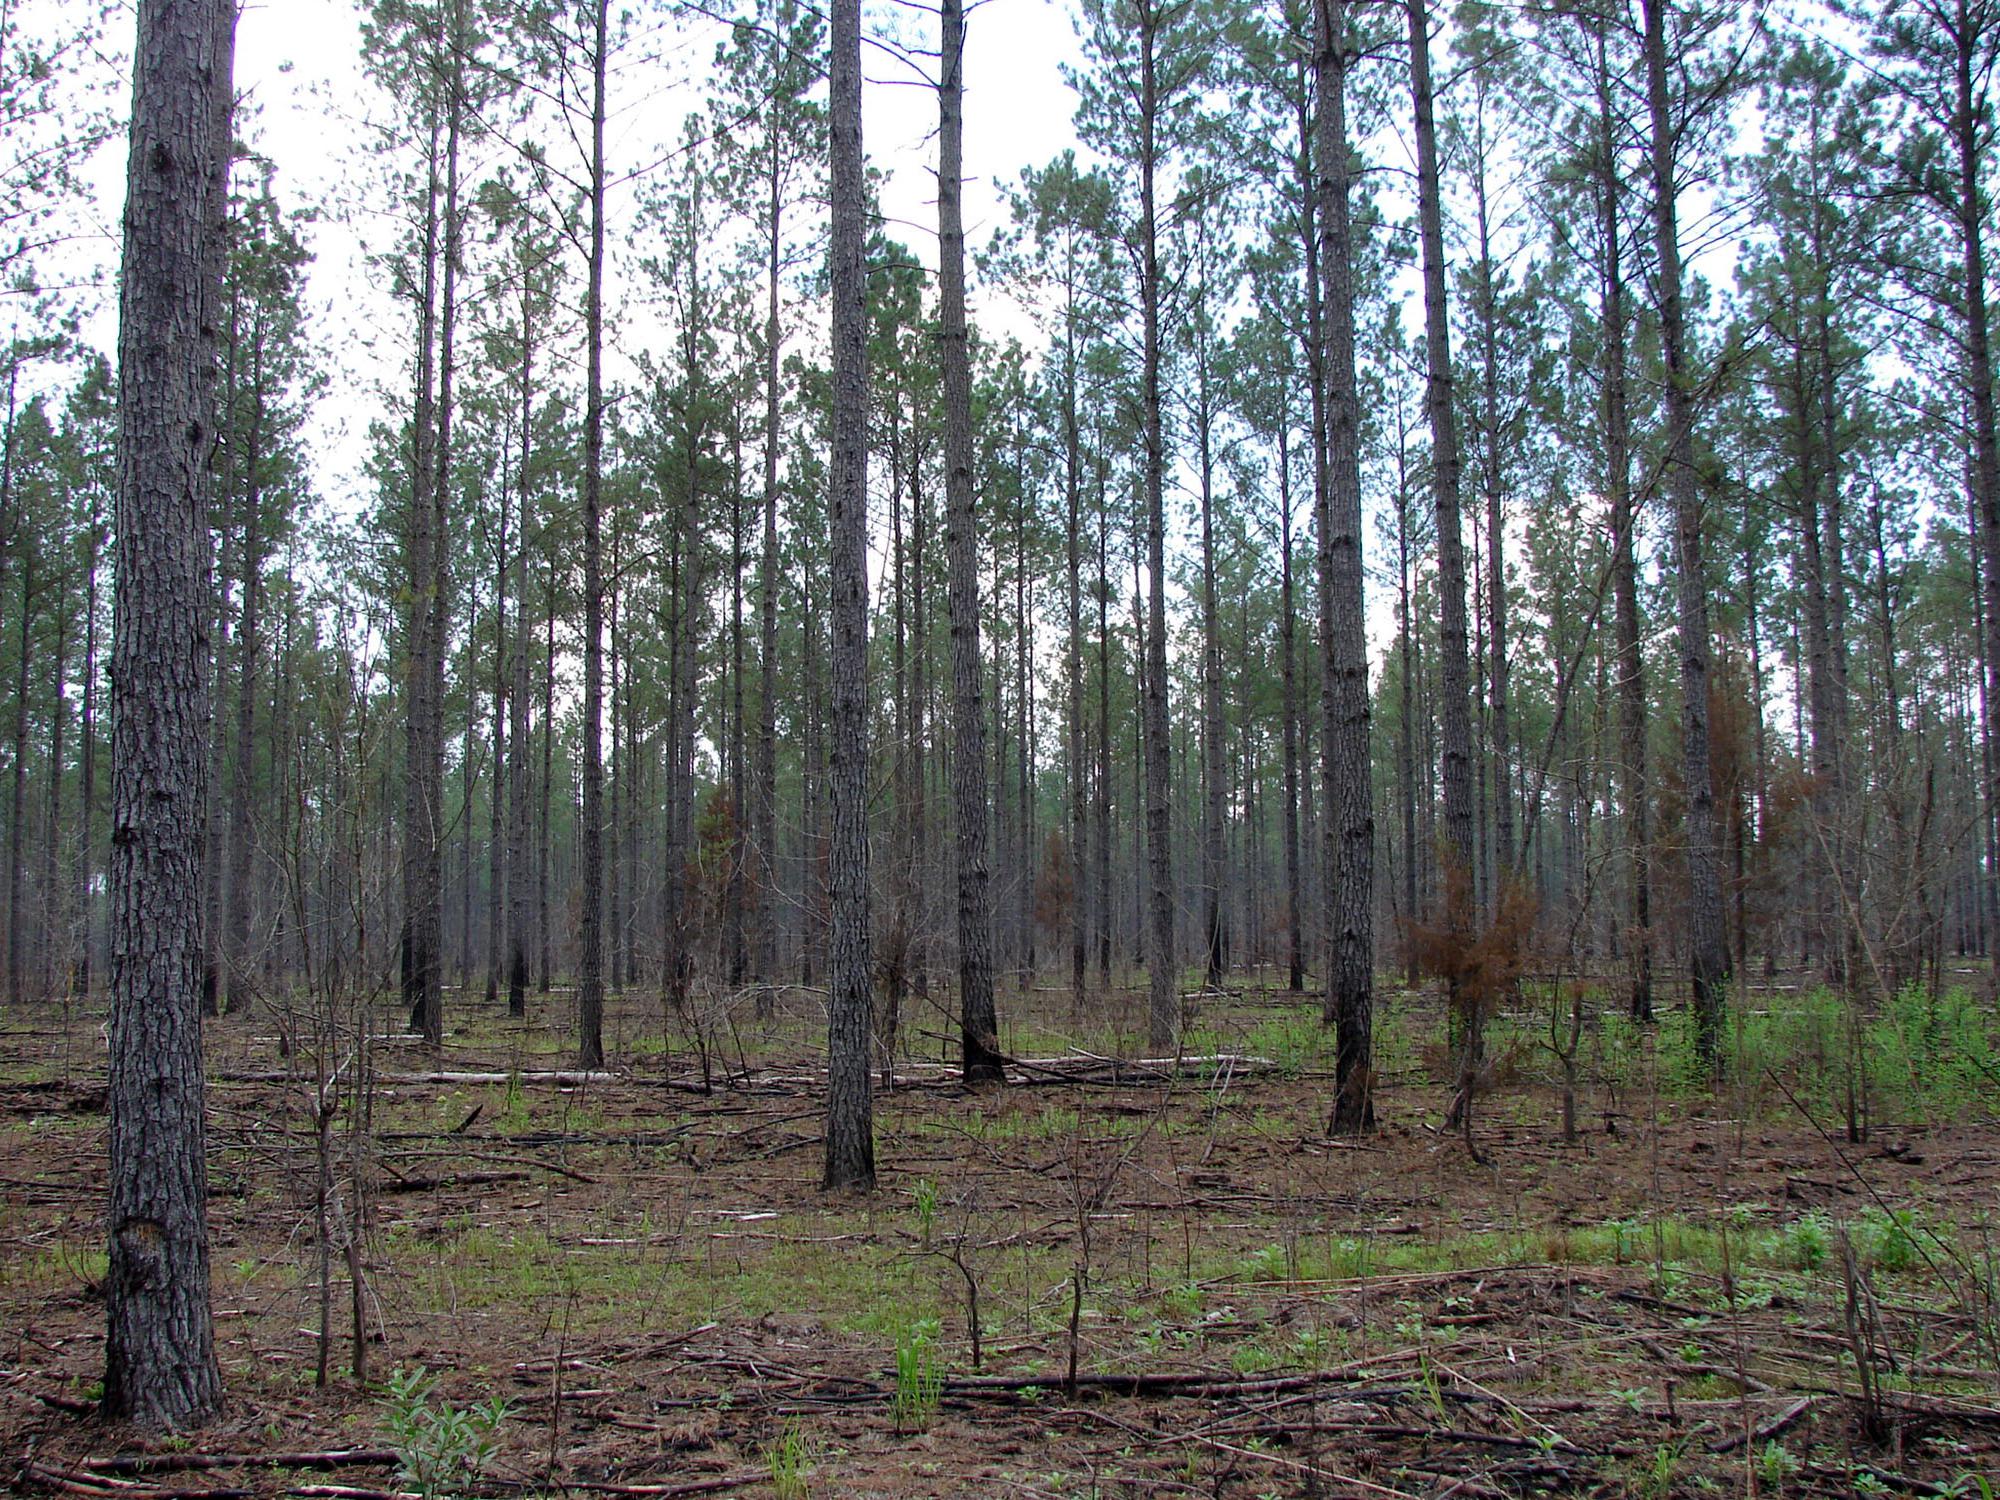 Tall, thinned pines in a wooded area with visible sky overhead. Ground plants are slowly beginning to grow.